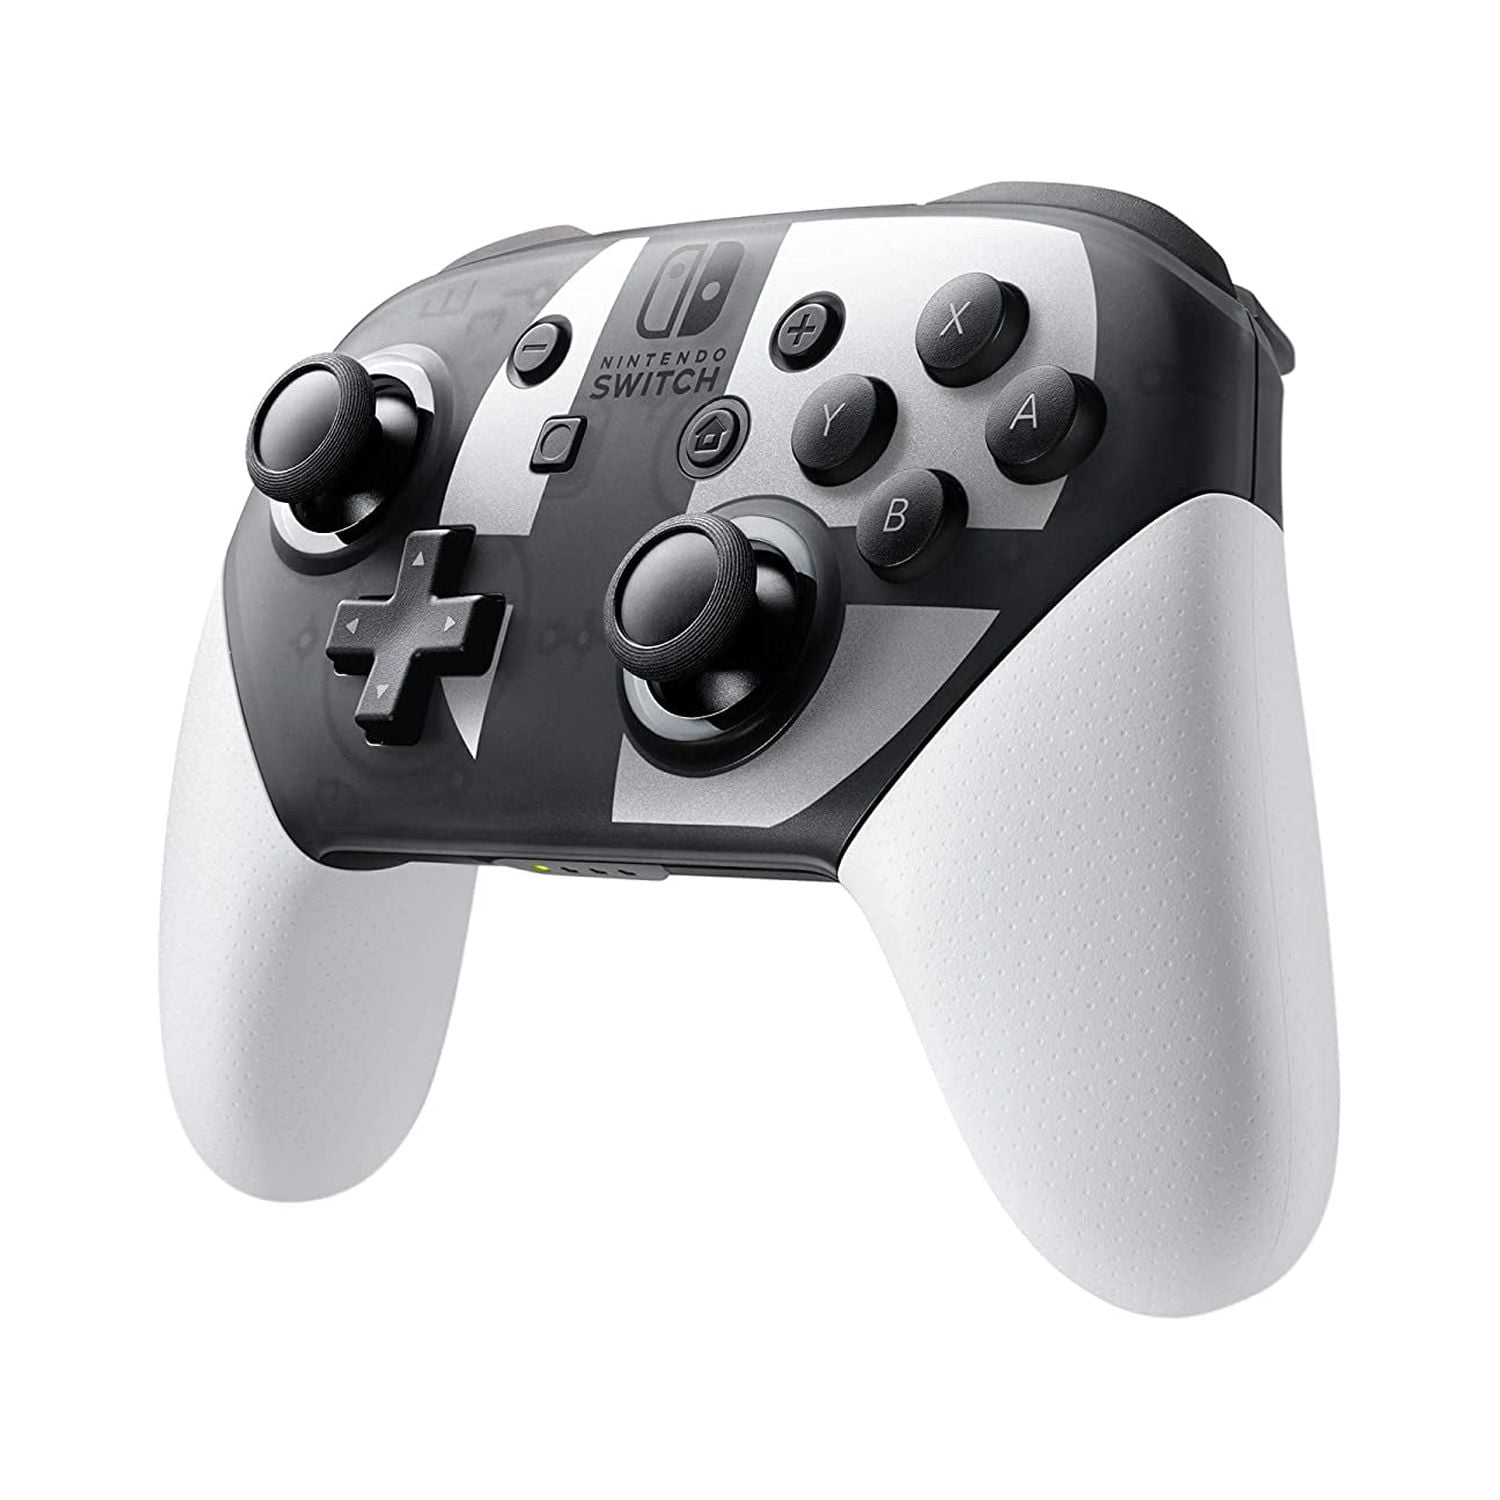 The Switch Pro Controller is Still the GOAT 